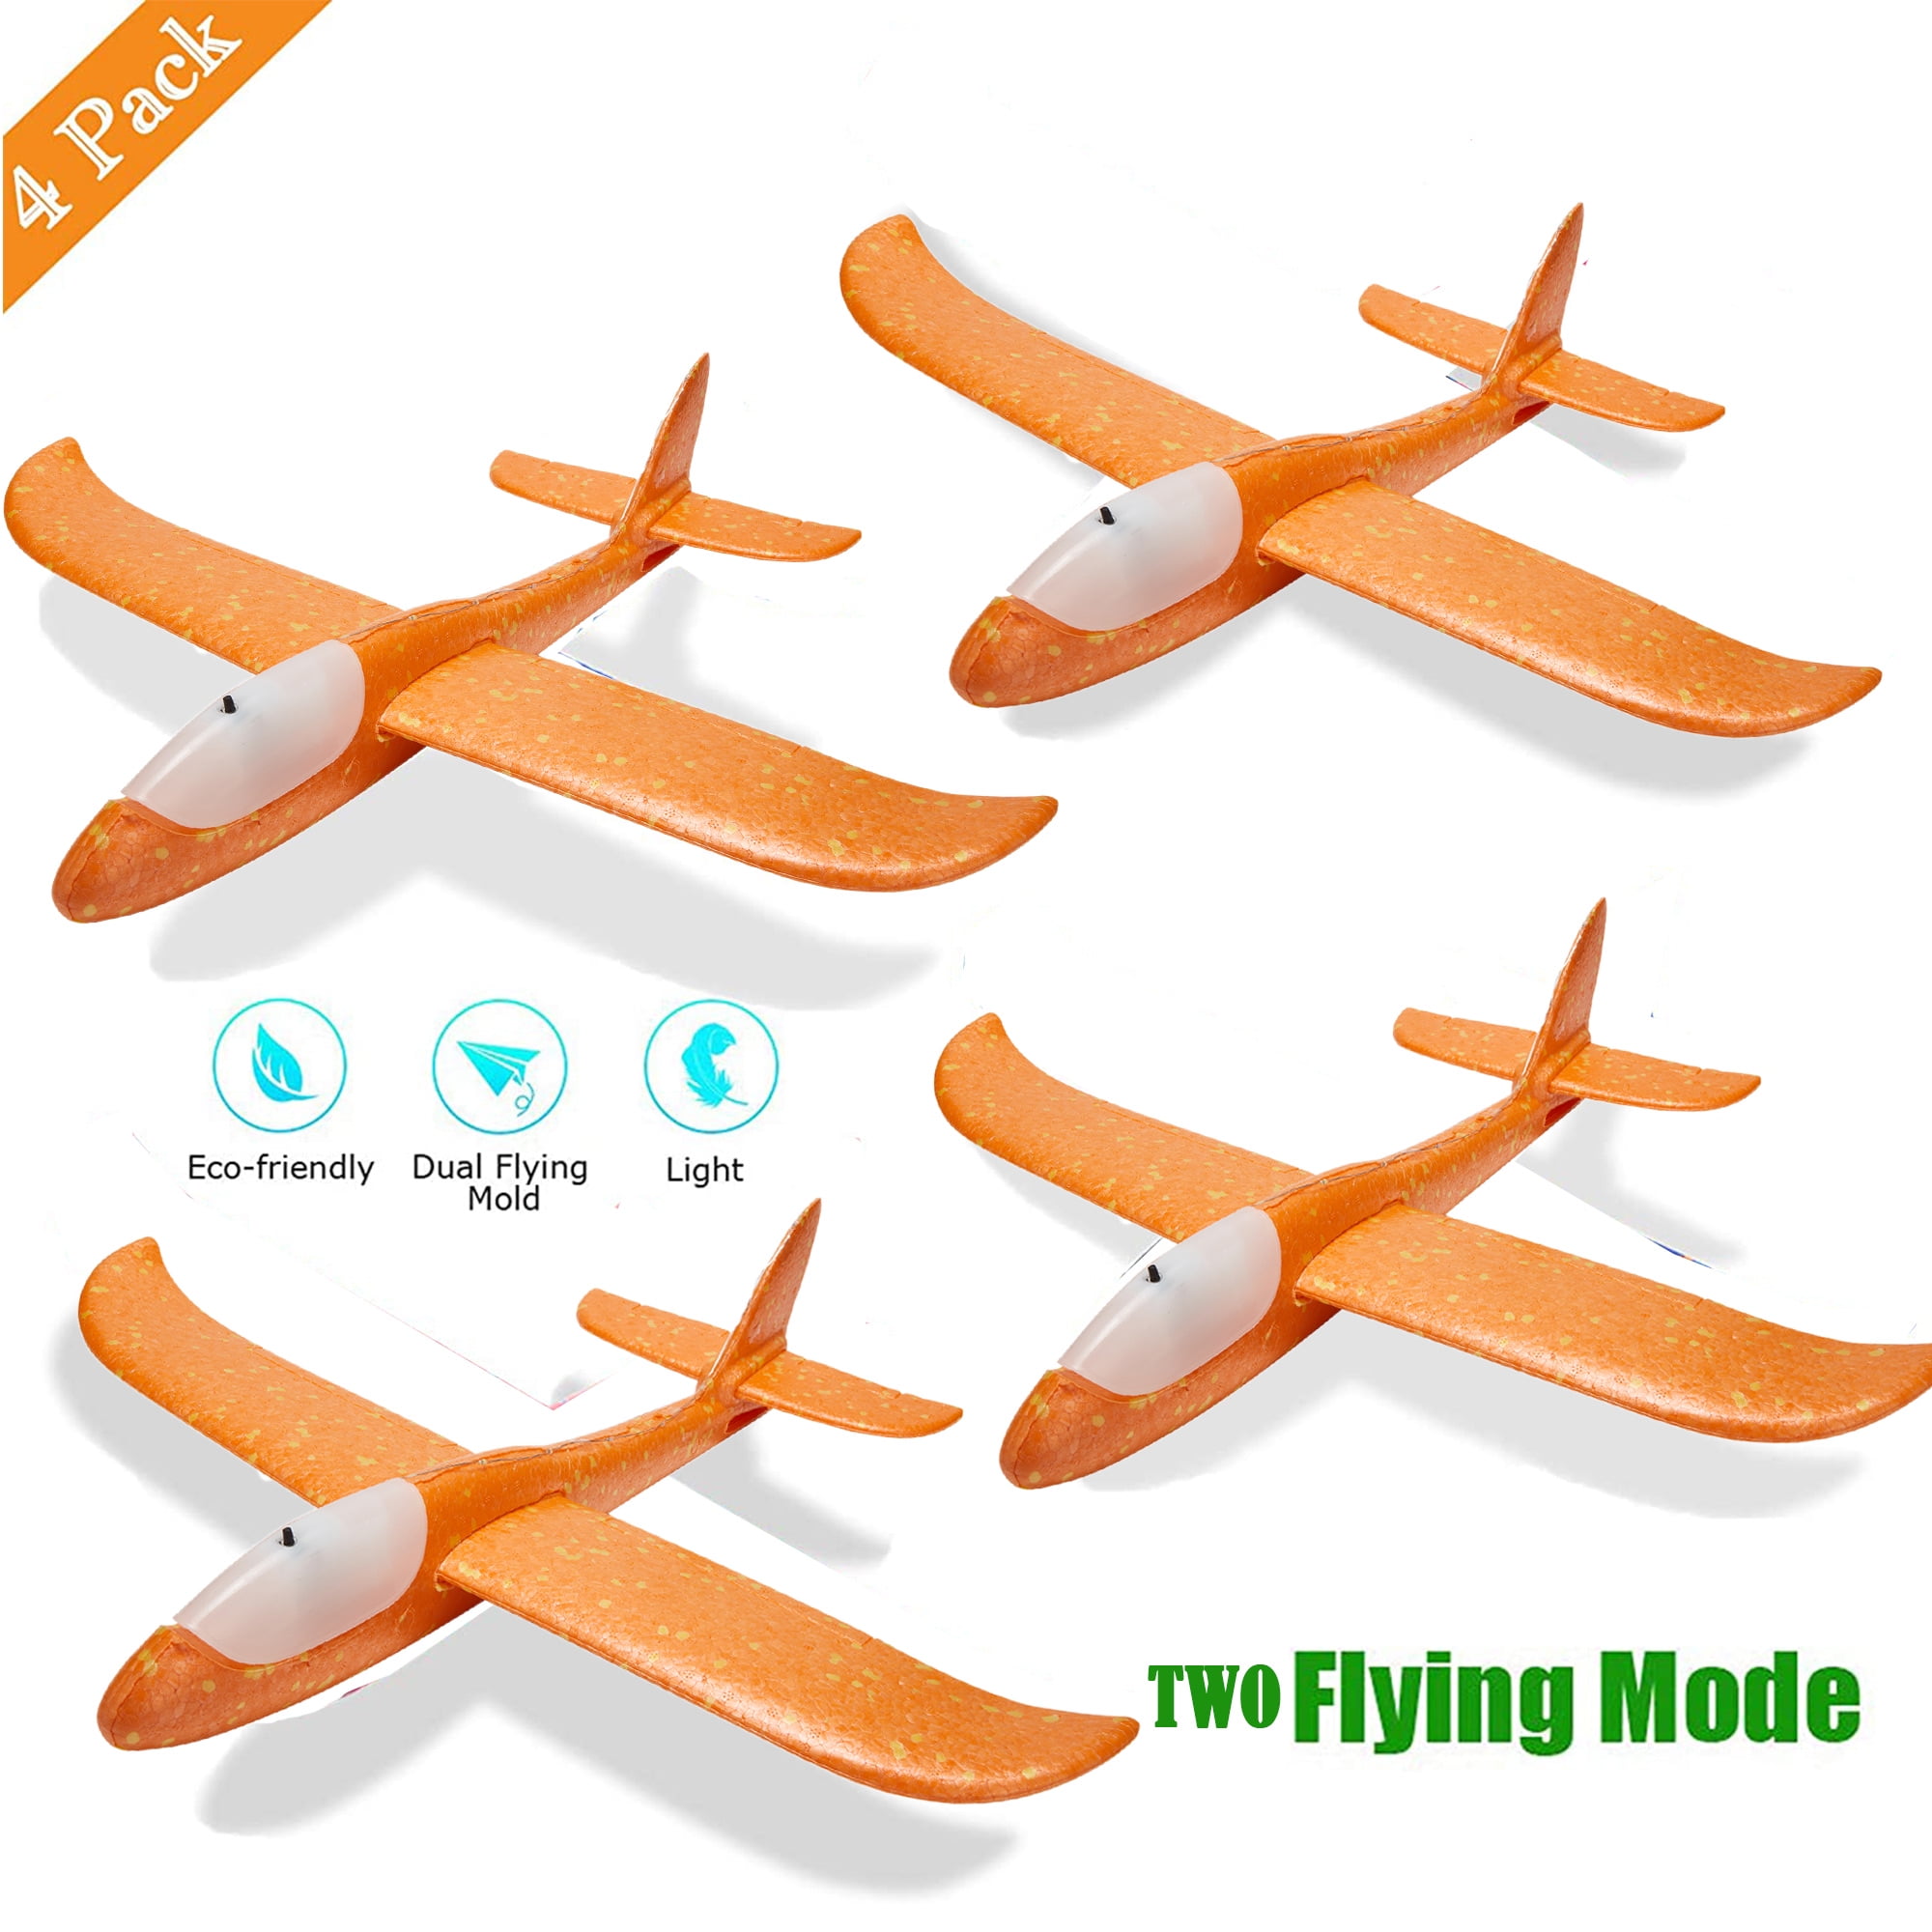 4 Pcs Hand Throwing Foam Aircraft,Airplane Toys,challenging,Outdoor Sports Toy,Model Foam Airplane,Airplane Glider,for 3-12 Years Old Kids Birthday Gifts Outdoor Flying Plane Glider Toys for Kids